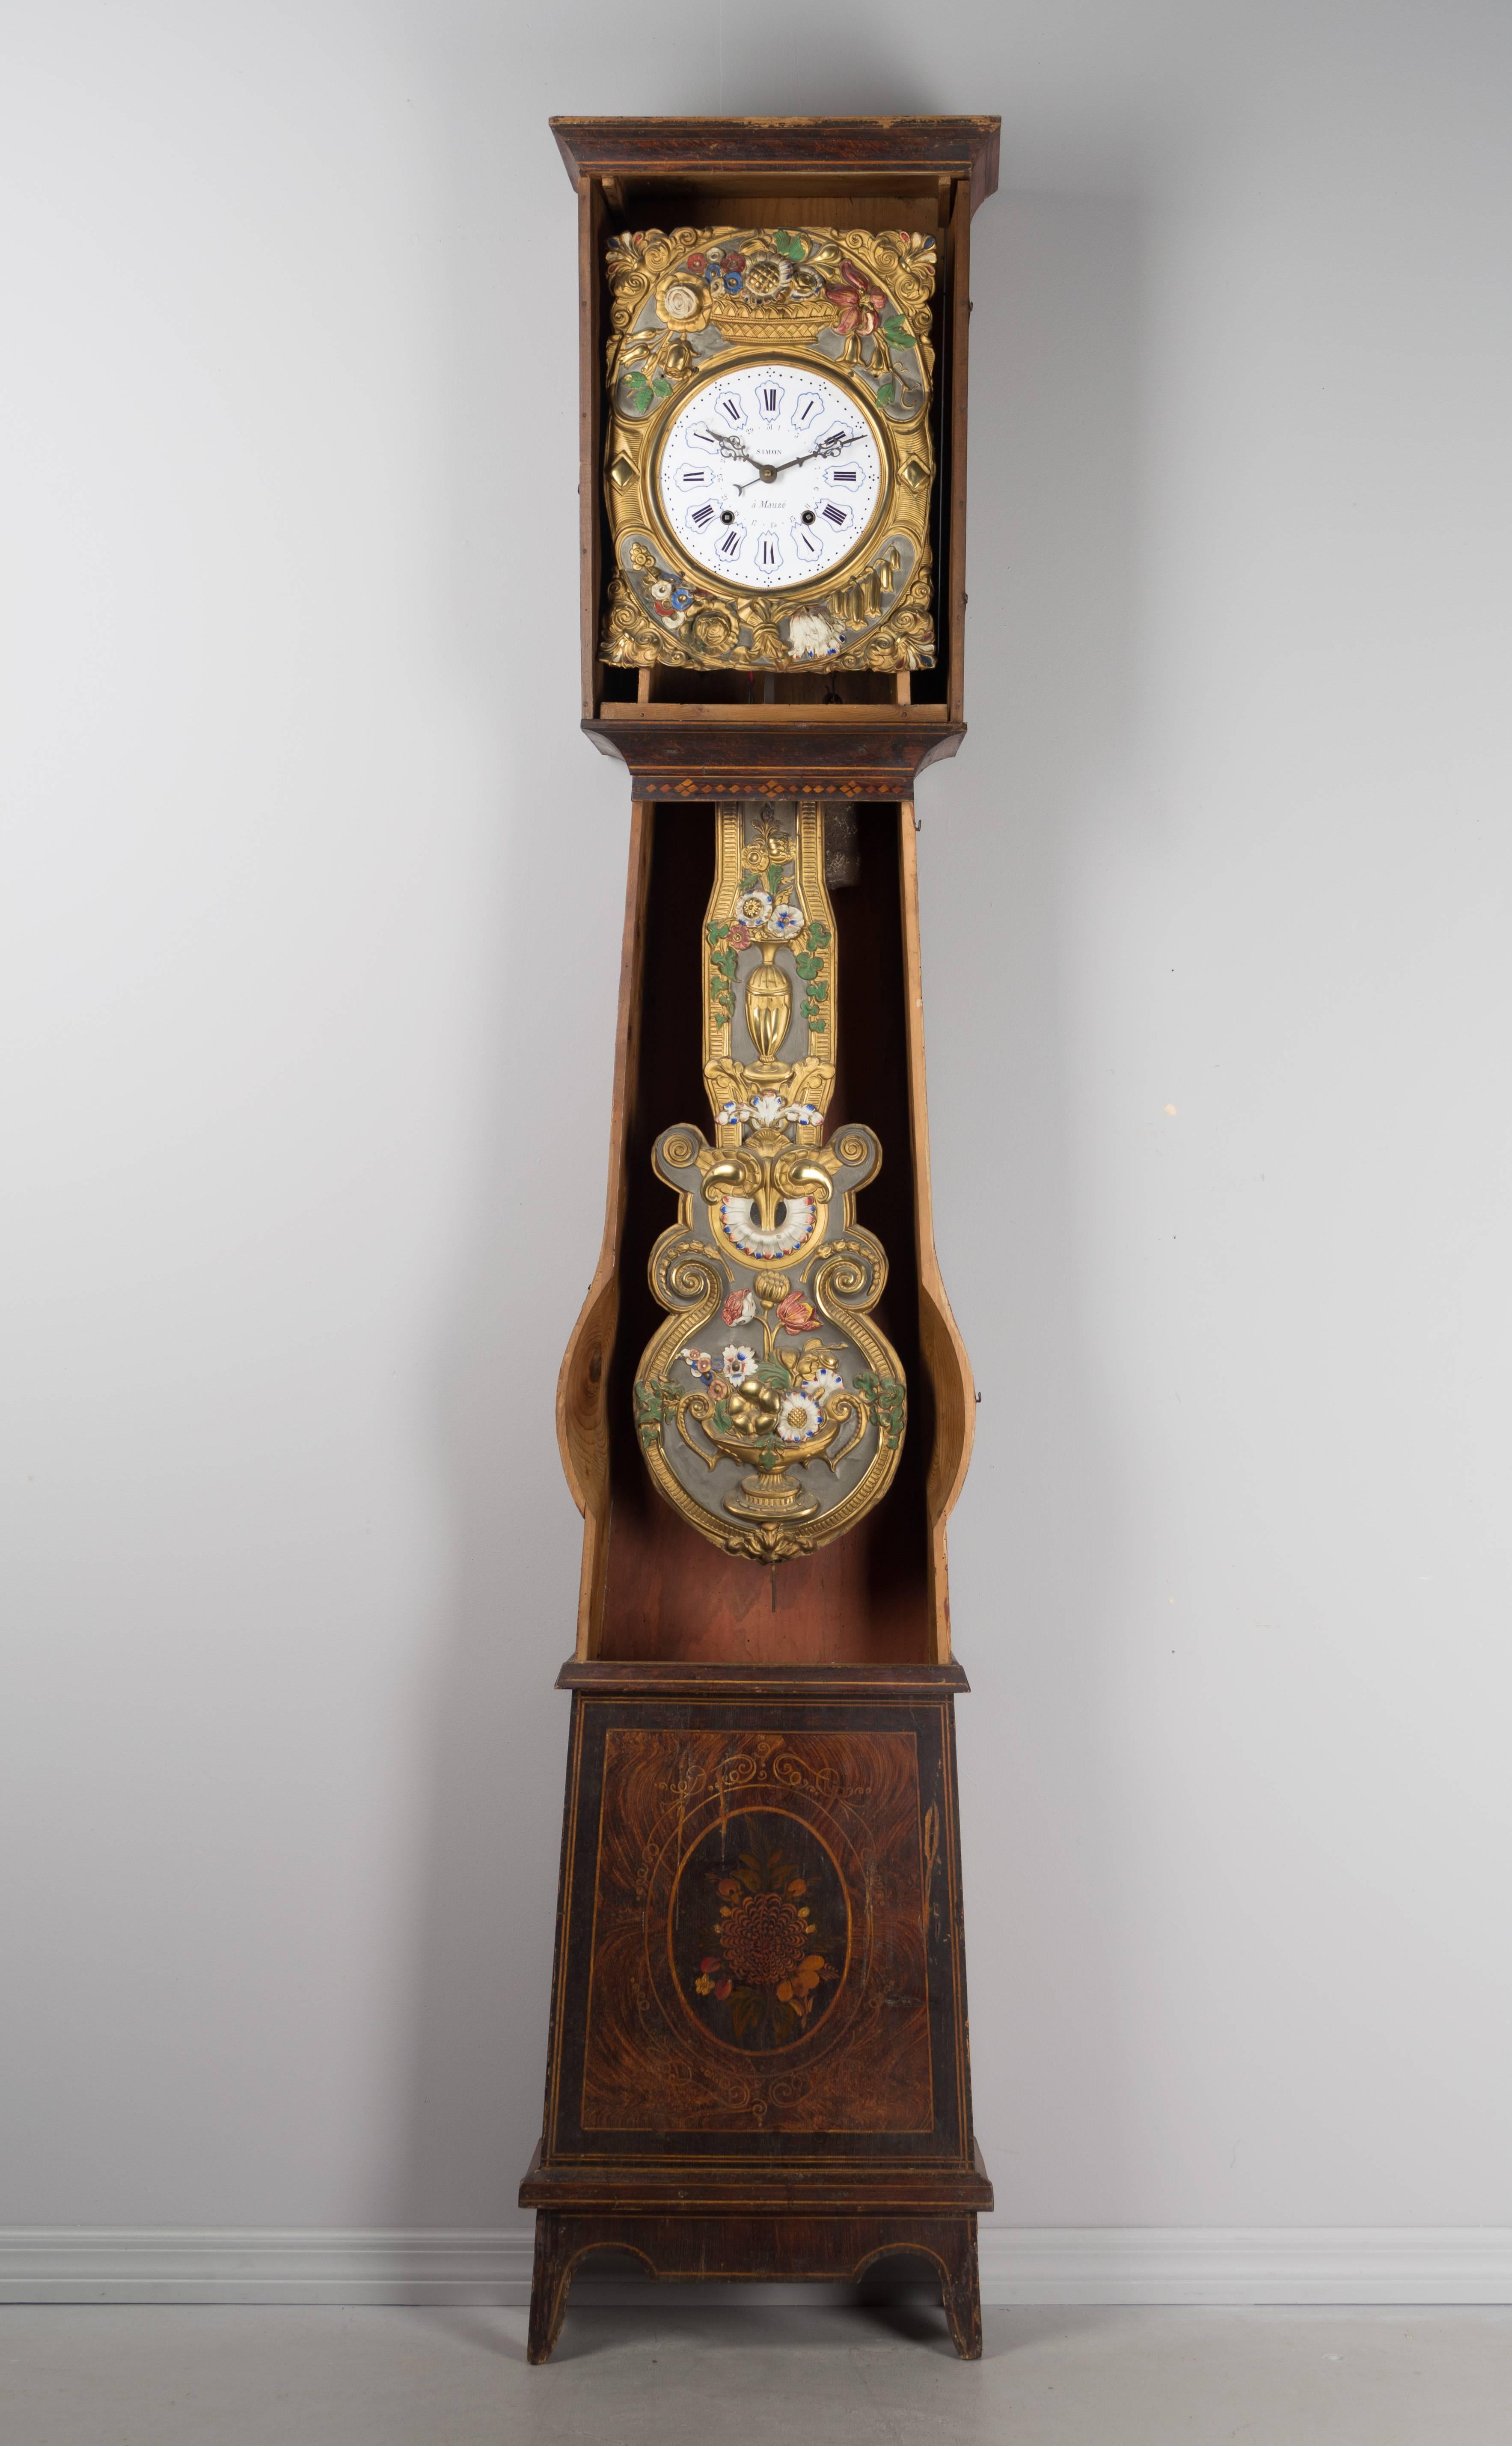 A comtoise or grandfather clock with polychrome painted pine case and brass embossment. The pendulum and clockface surround are beautifully decorated with floral motif and retain the original painted surface. Seven day Morbier movement with date, in